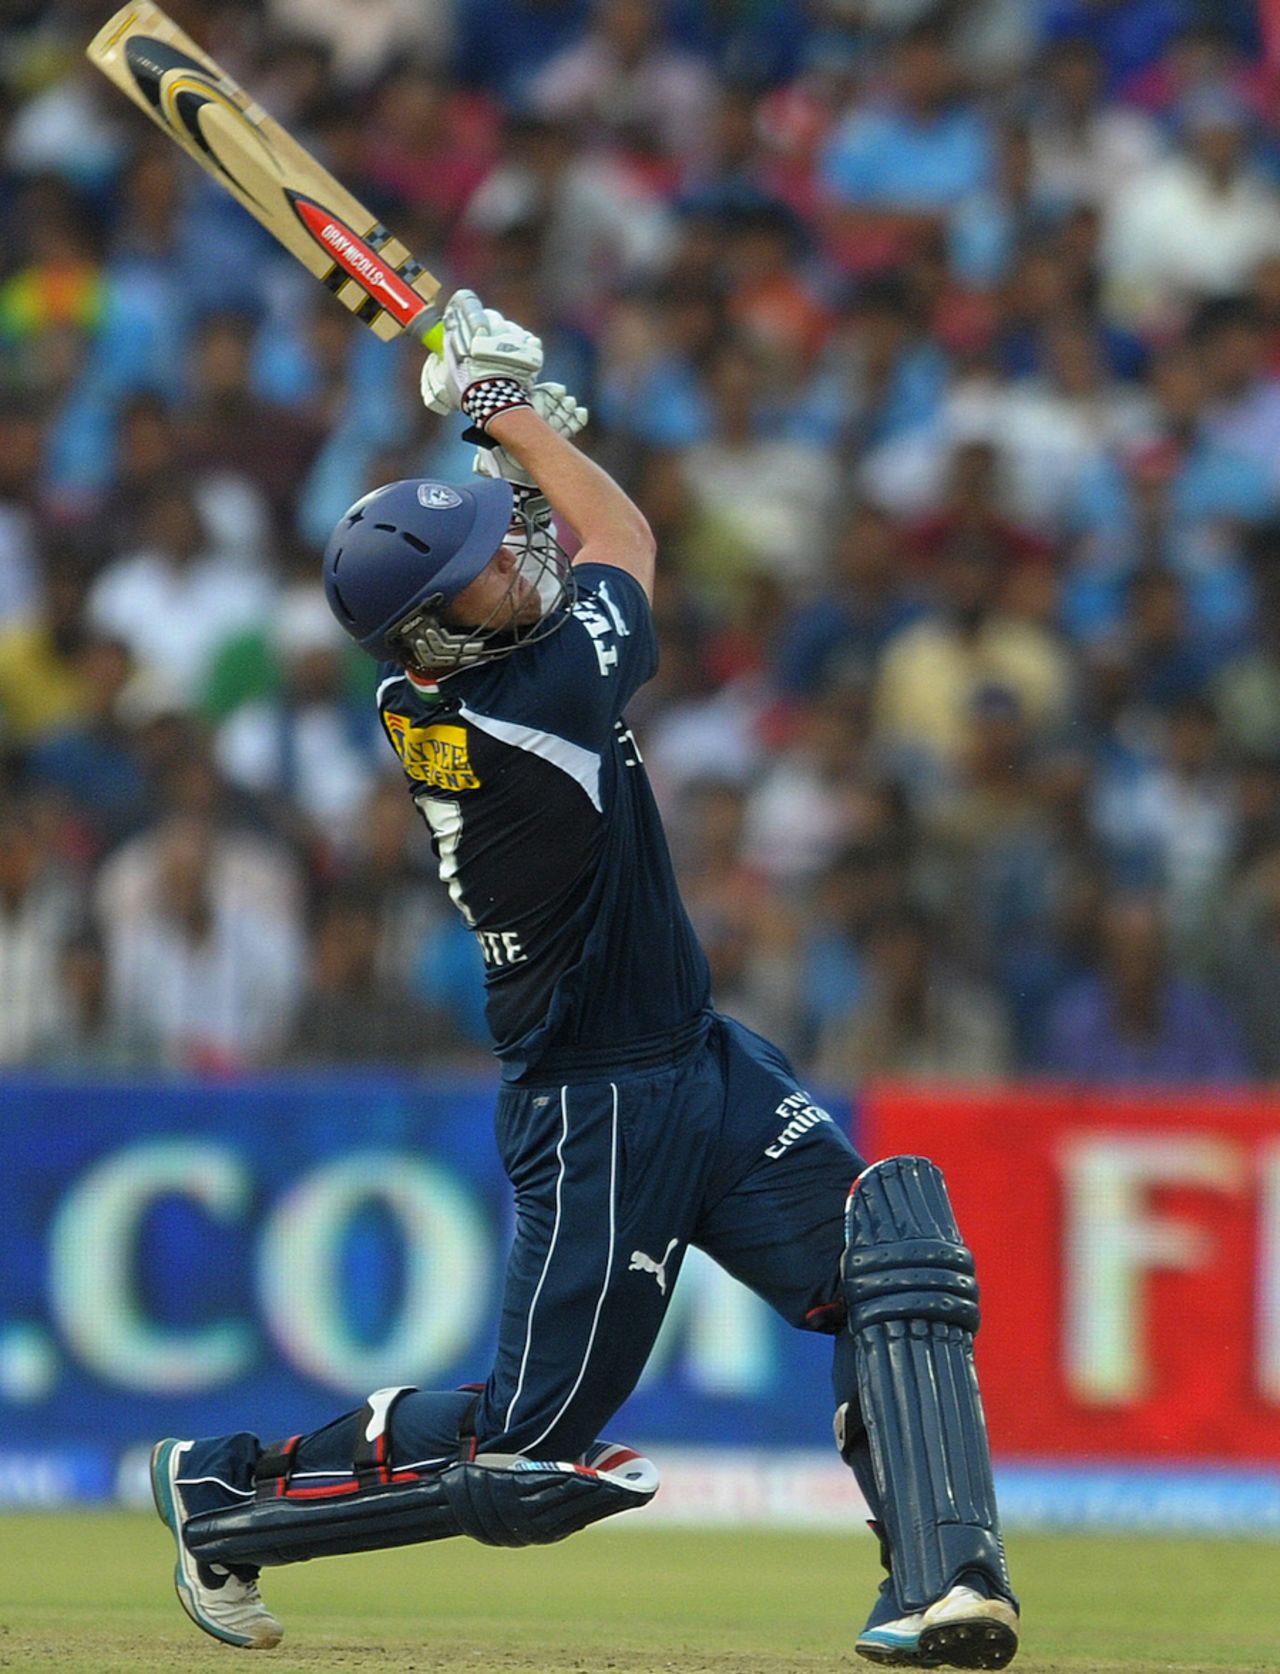 Cameron White hits one over the top, Deccan Chargers v Pune Warriors, IPL, Cuttack, May 1, 2012